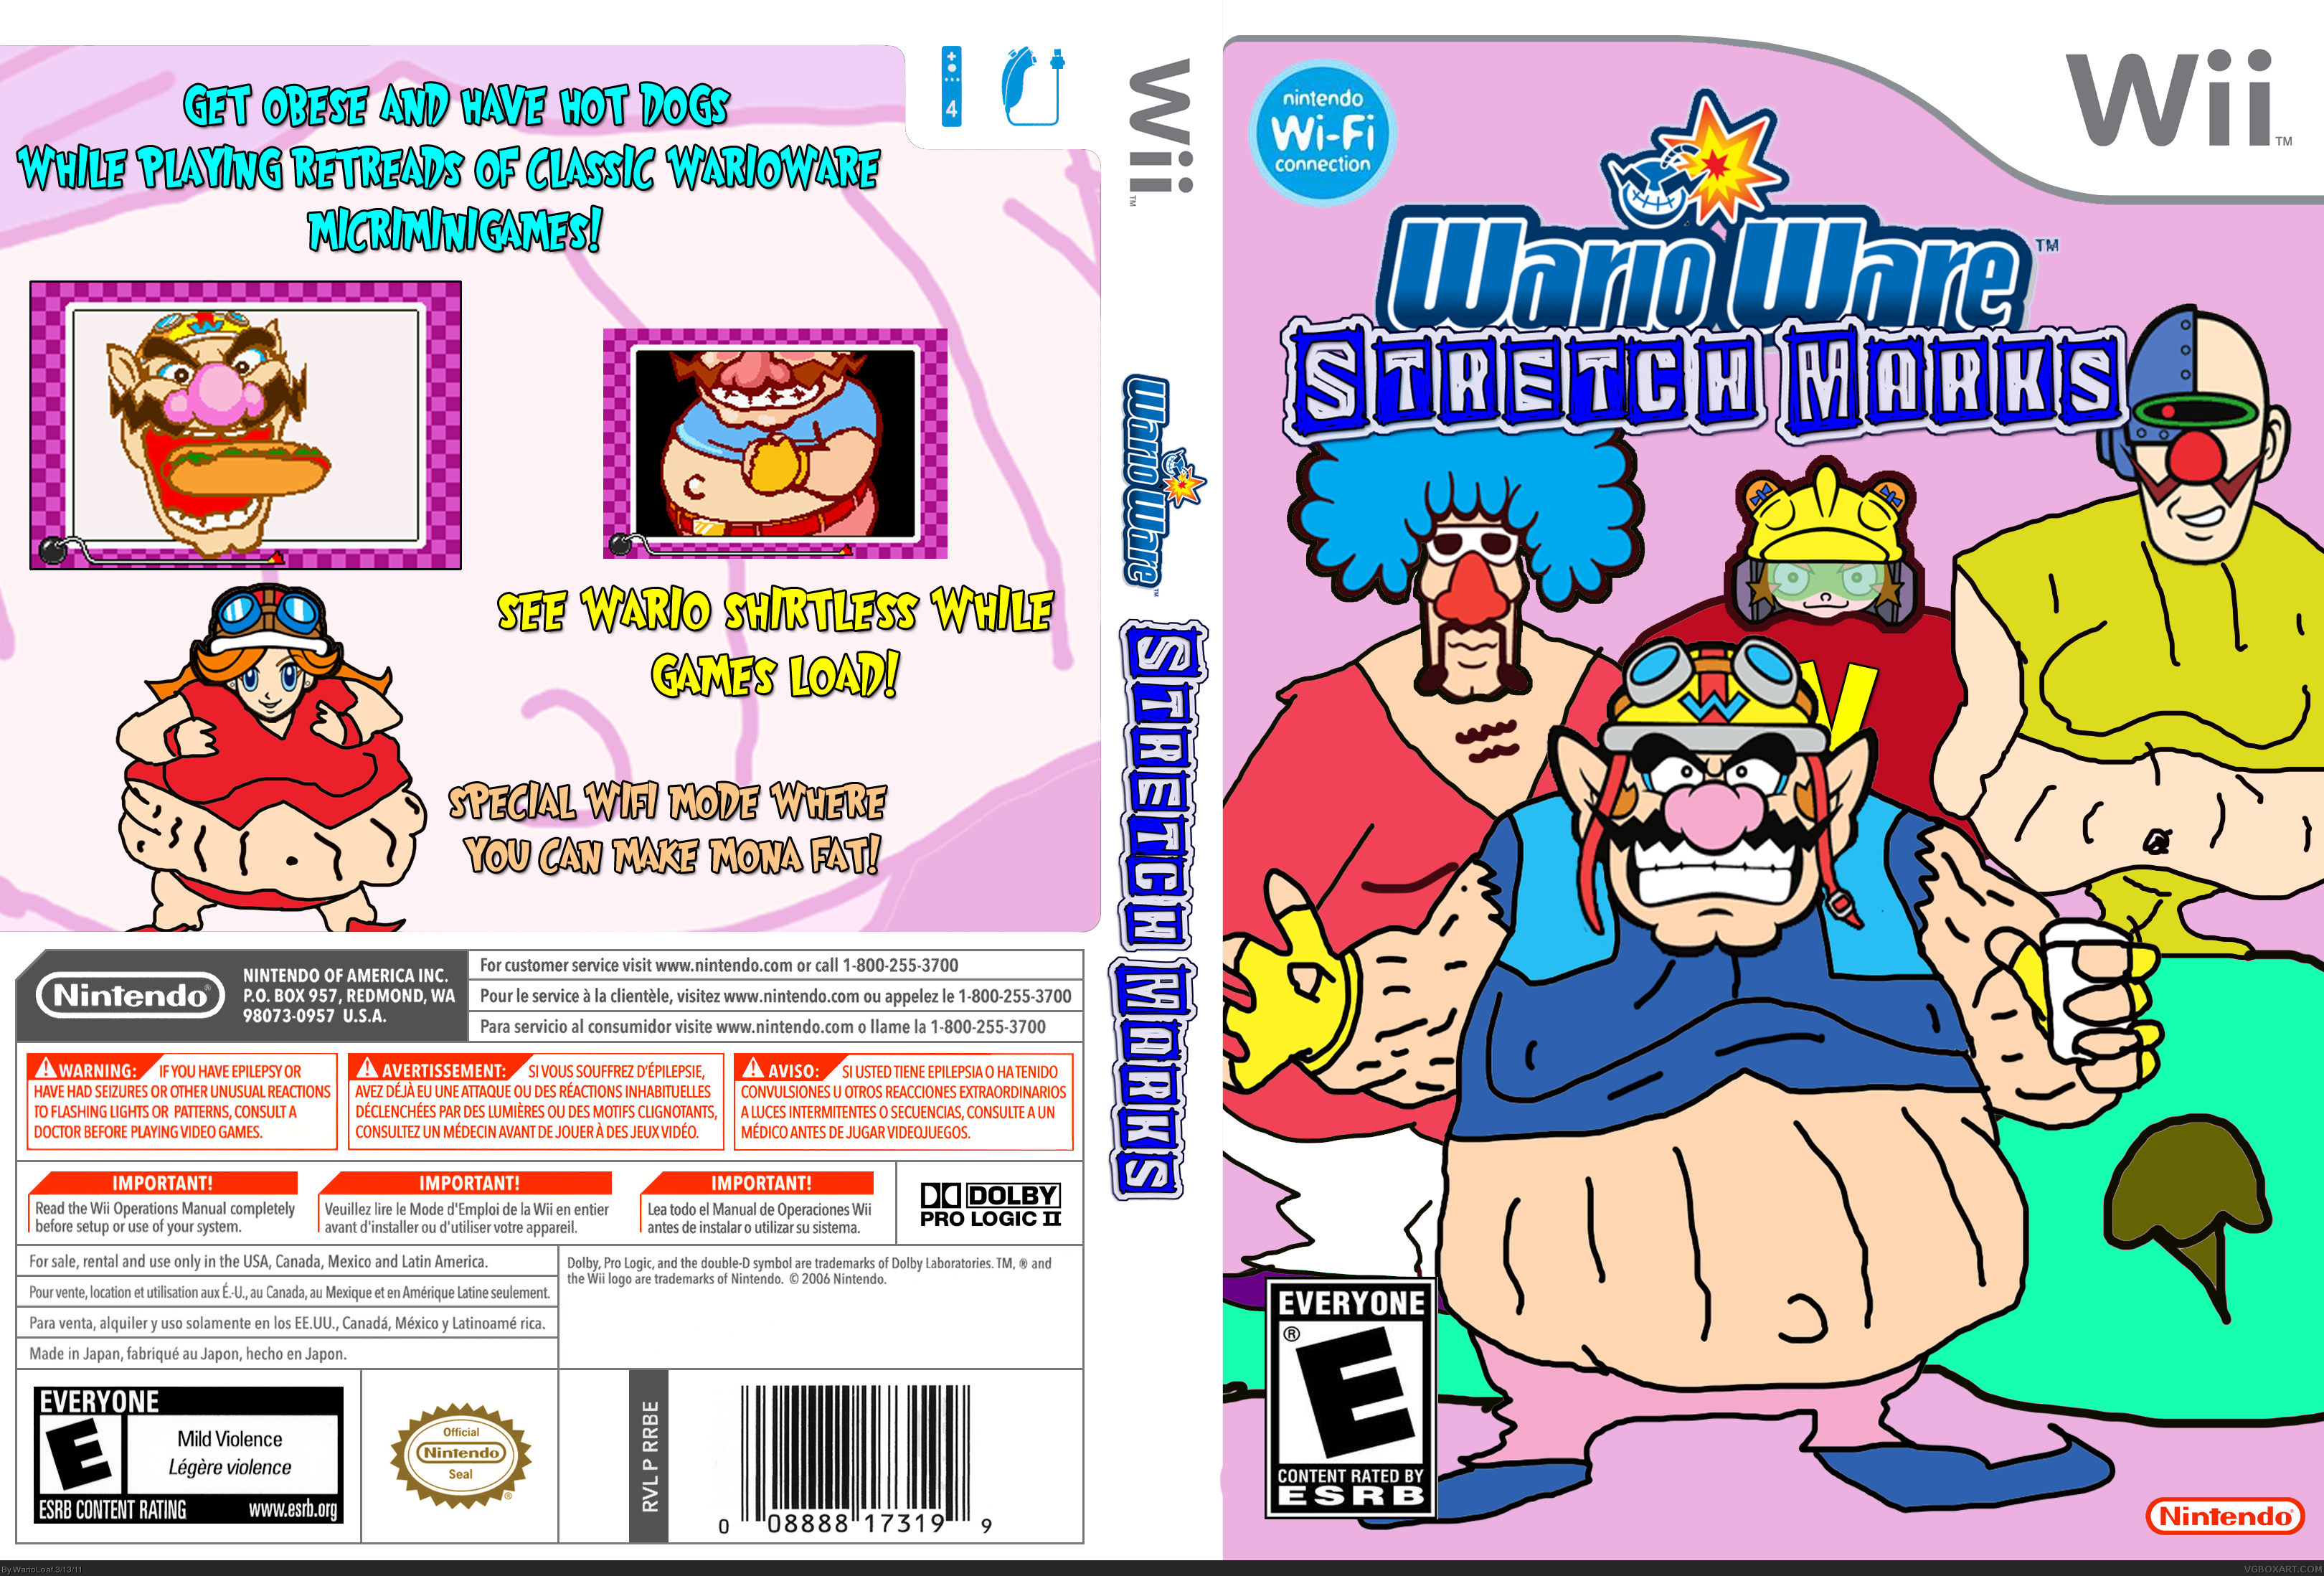 WarioWare: Stretch Marks box cover